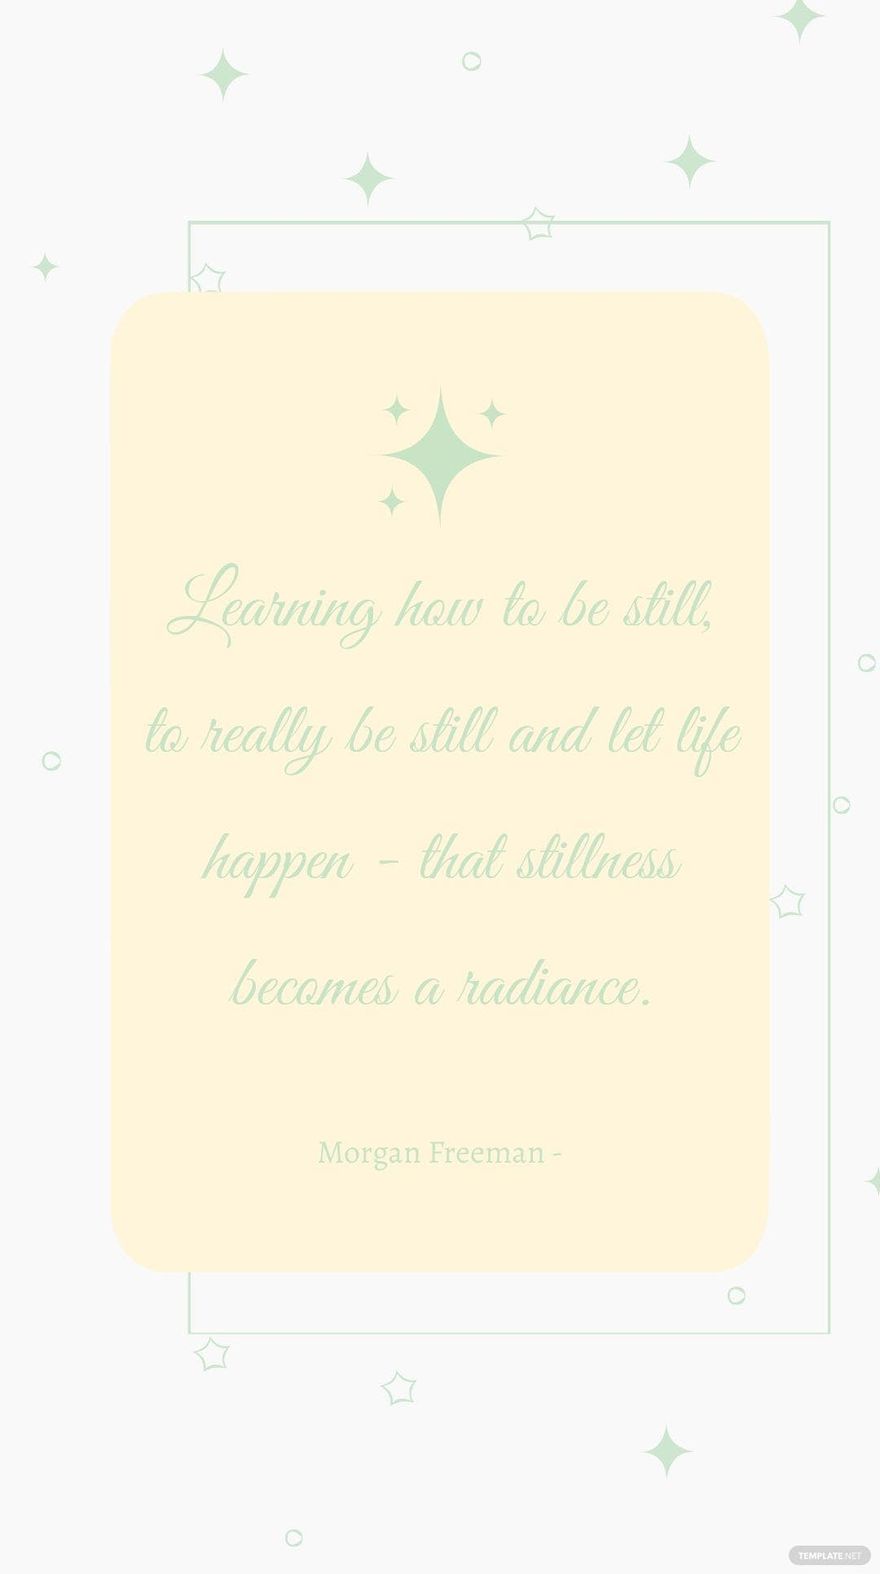 Morgan Freeman - Learning how to be still, to really be still and let life happen - that stillness becomes a radiance.